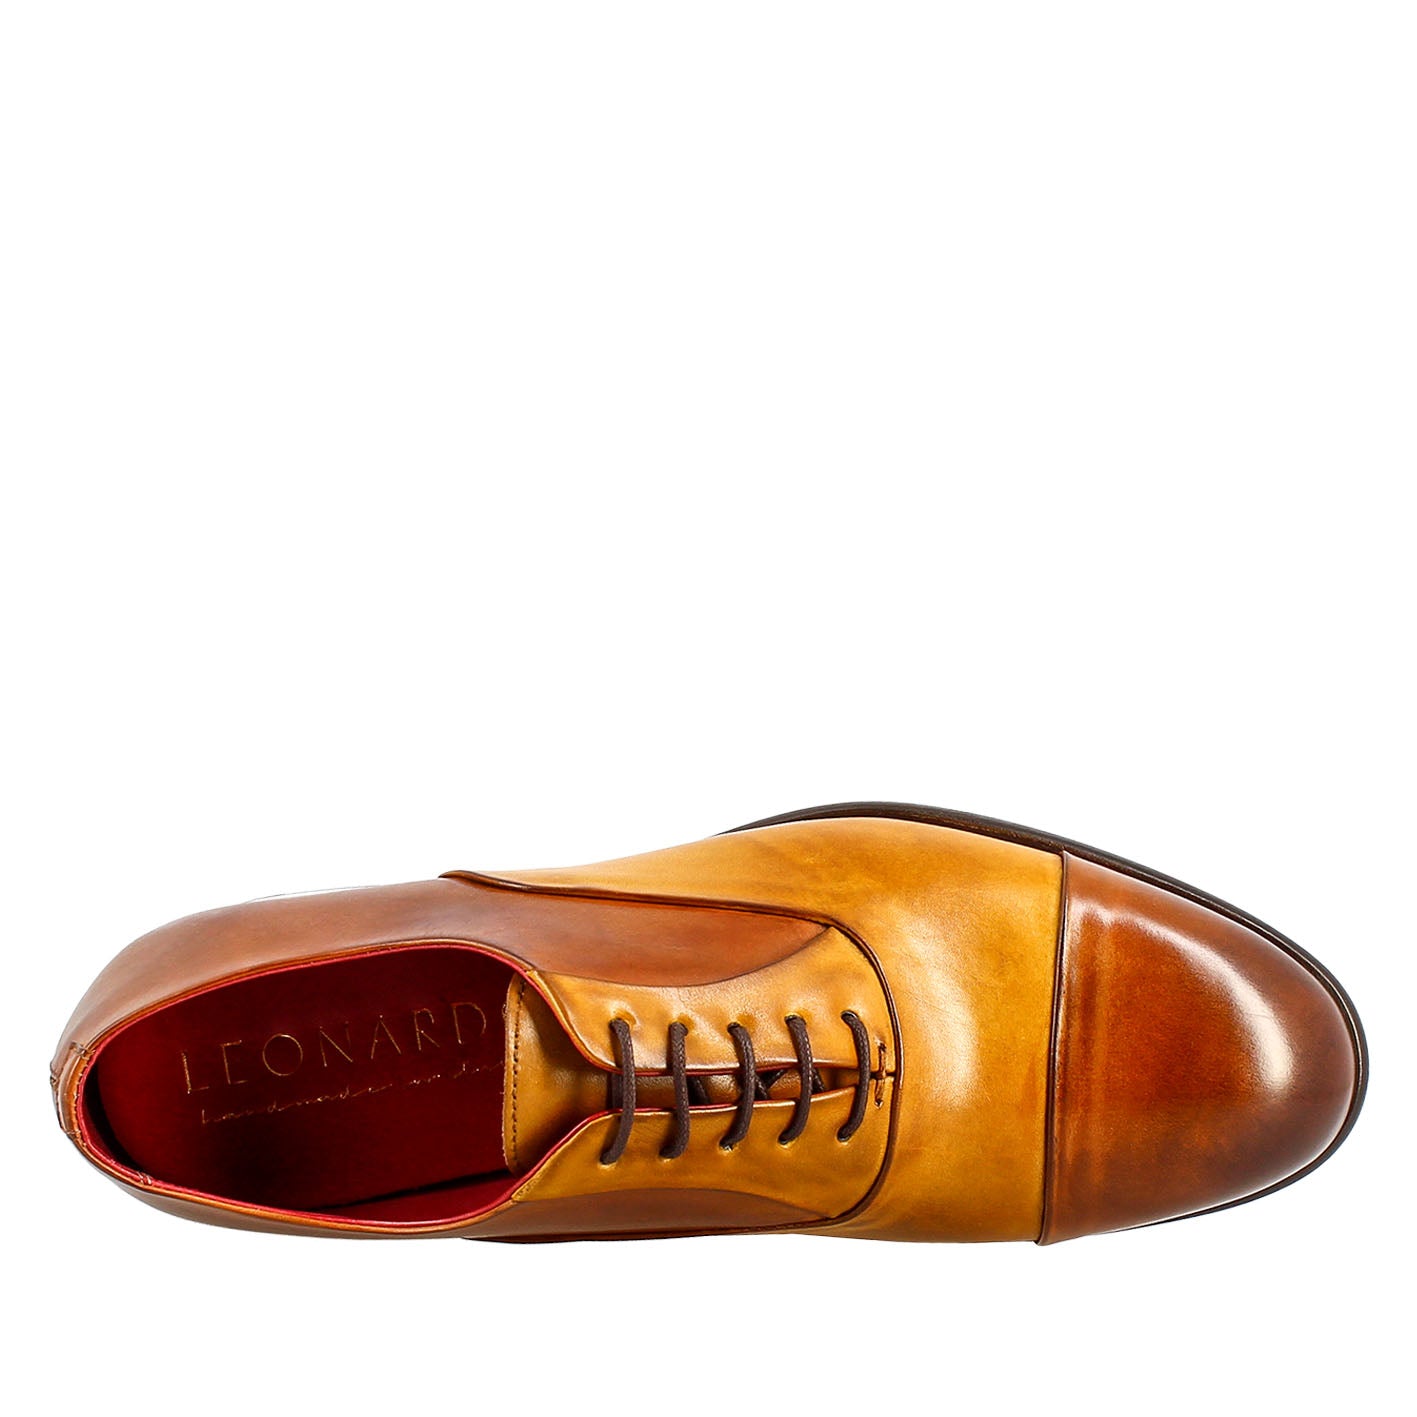 Elegant men's brown and yellow oxford in leather and red lining